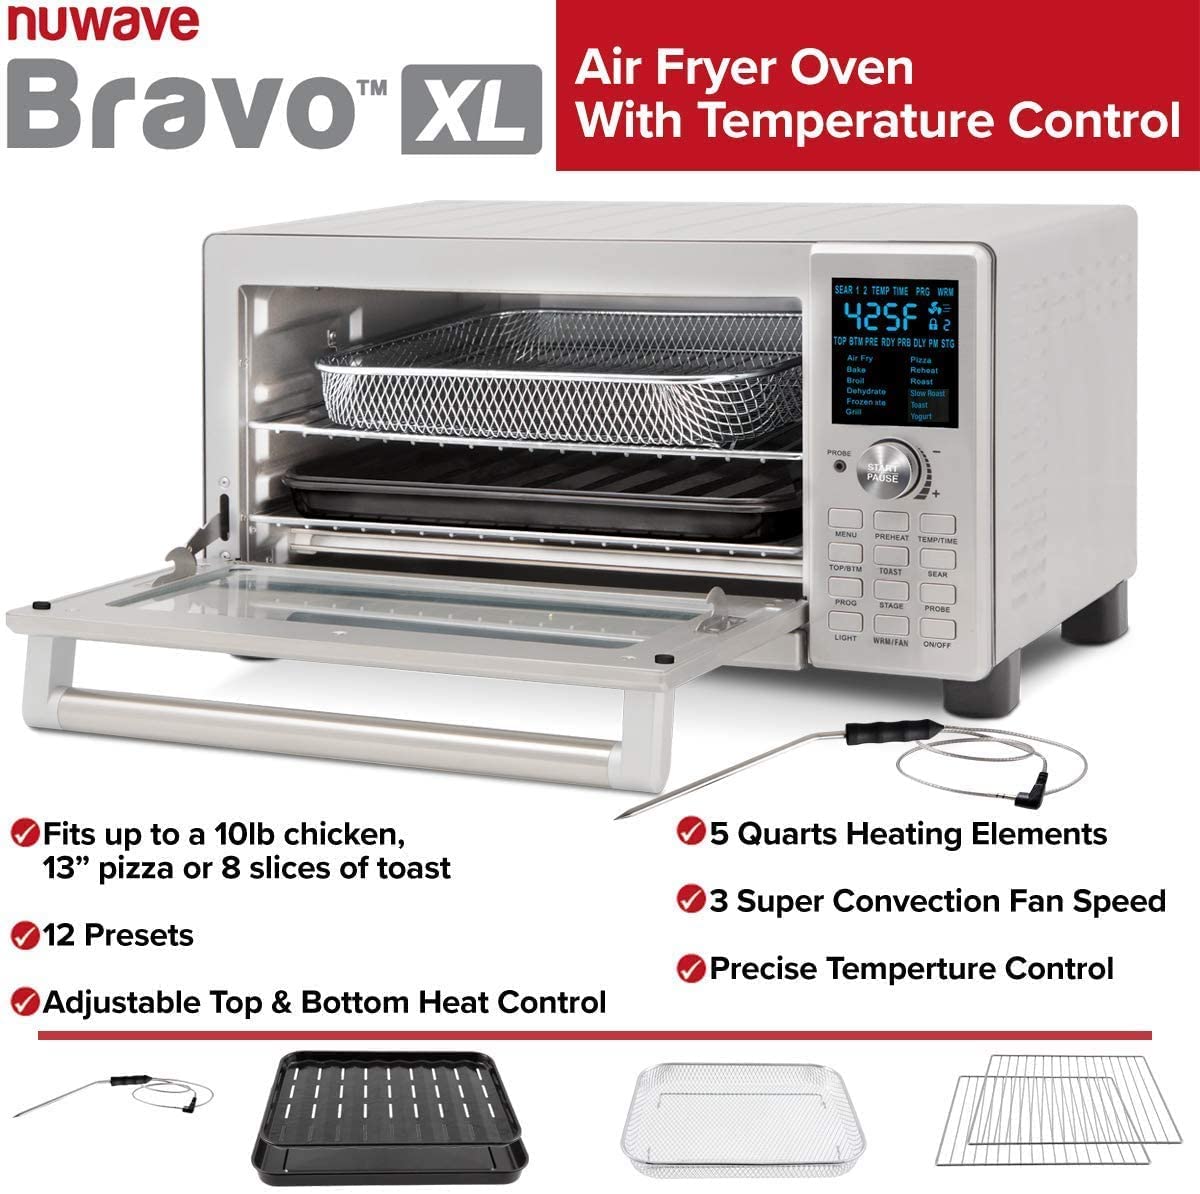 Nuwave (Renewed) Bravo XL Air Fryer Toaster Oven, 12-in-1 Countertop Convection, 30-QT Capacity, Integrated Temperature Probe, 50°-500°F Temperature Controls, Brushed Stainless Steel Look